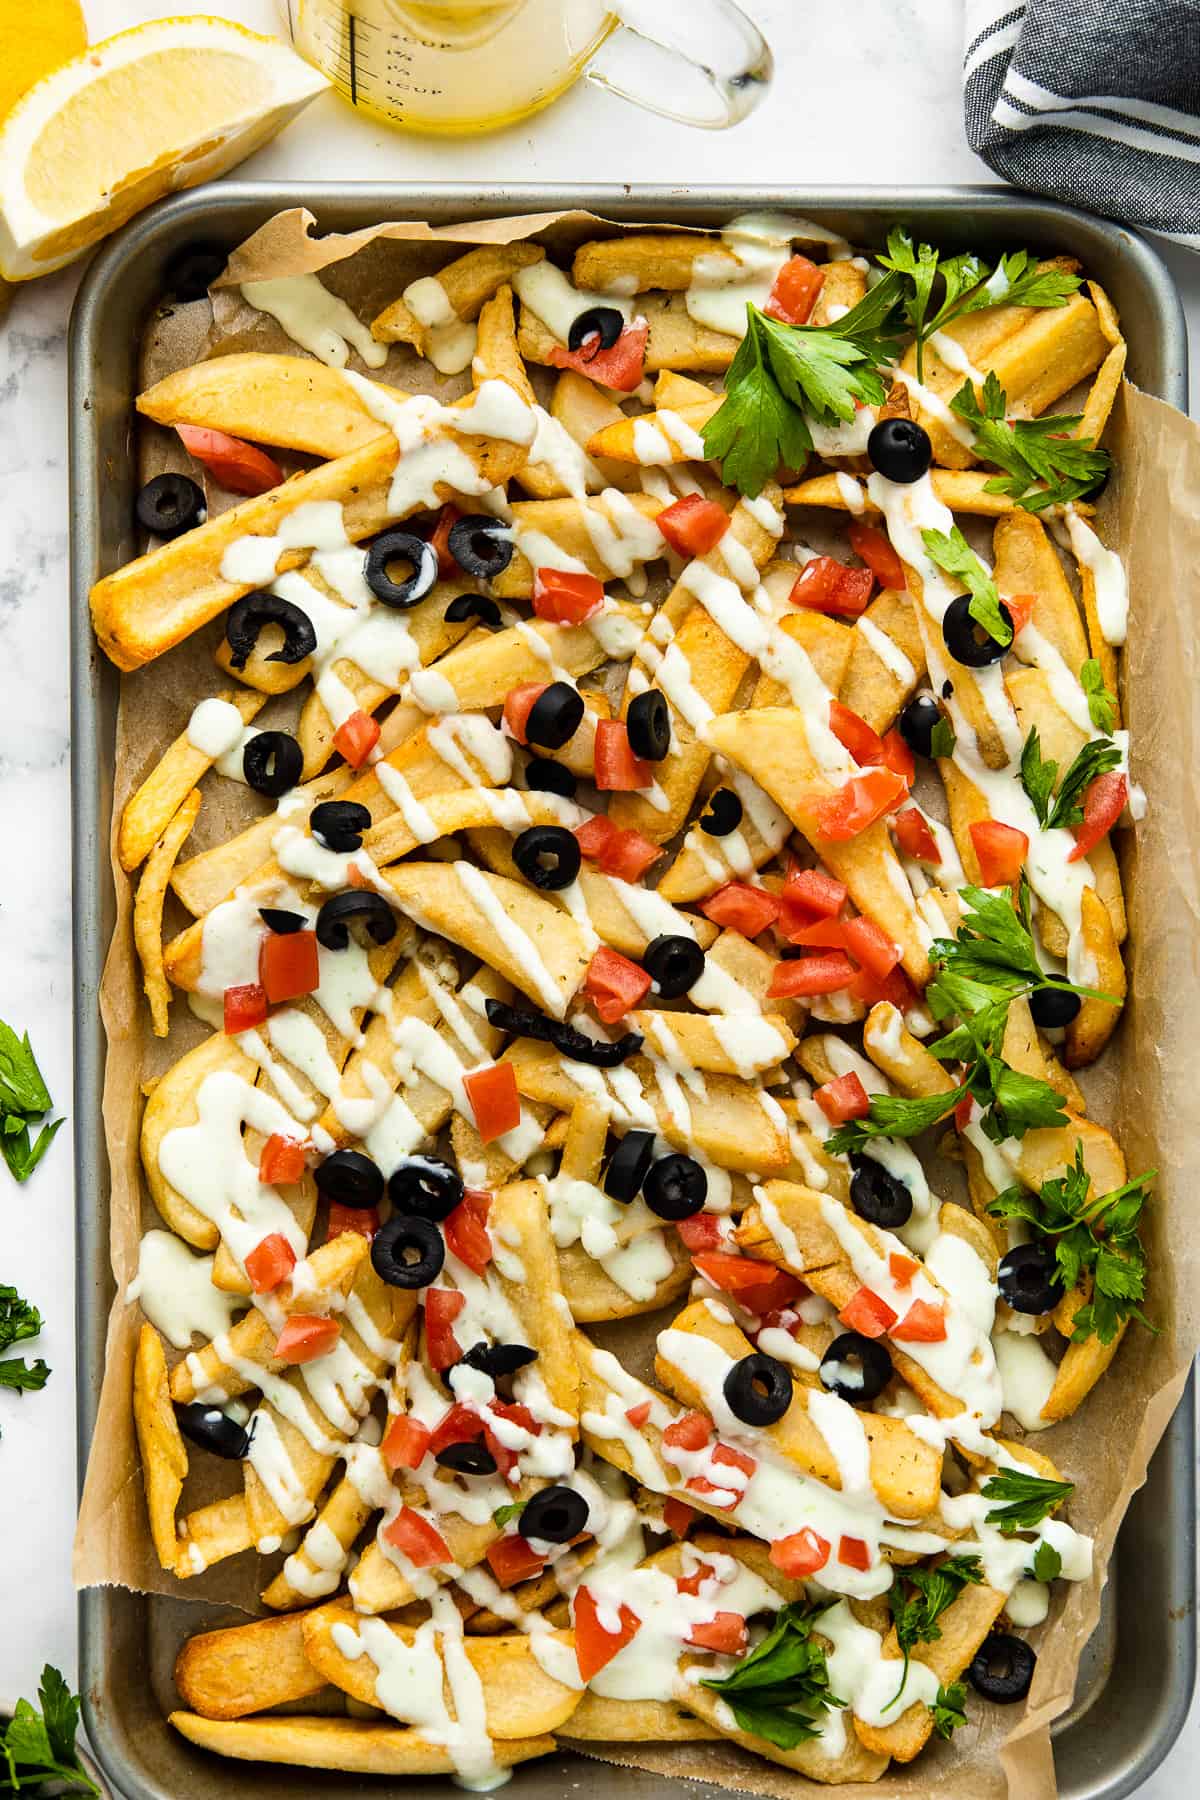 Loaded fries served on a sheet tray dressed with feta dressing and parsley.